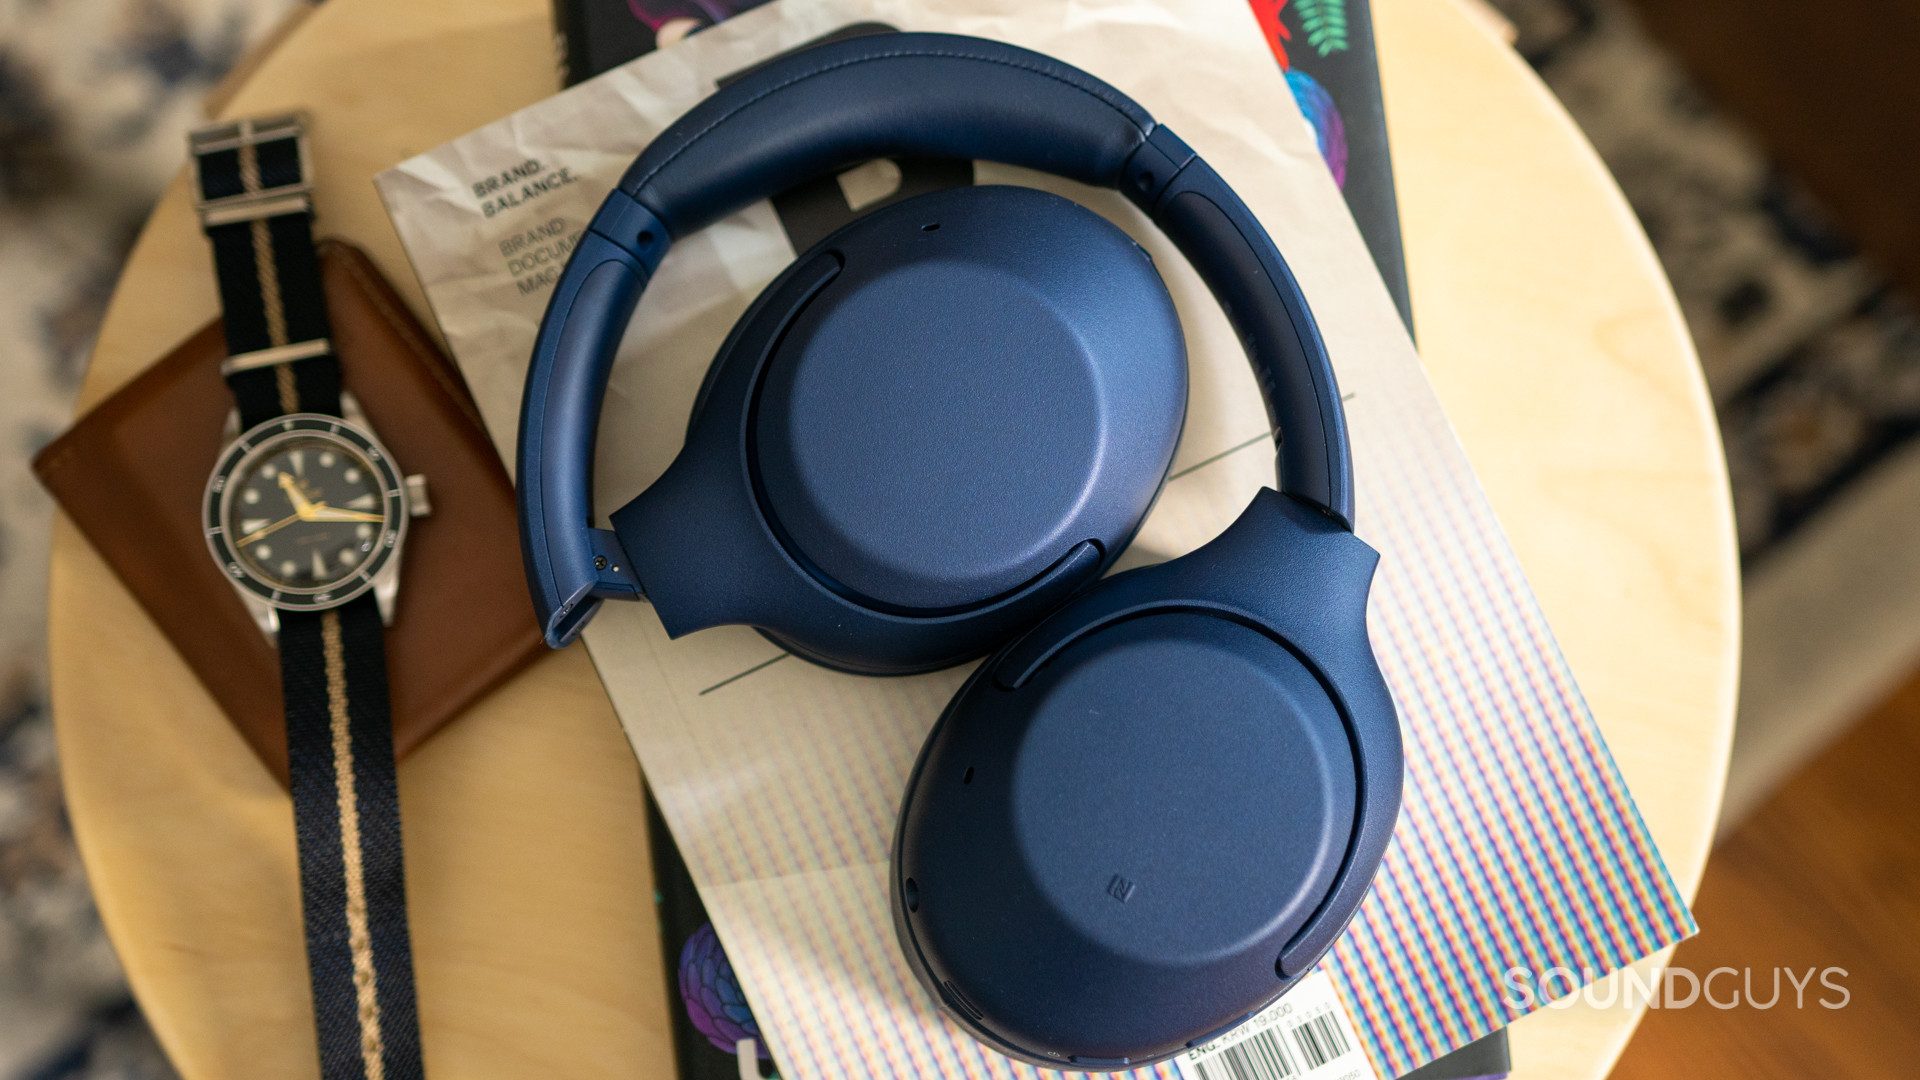 The Sony WH-XB900N headphones on a small table.